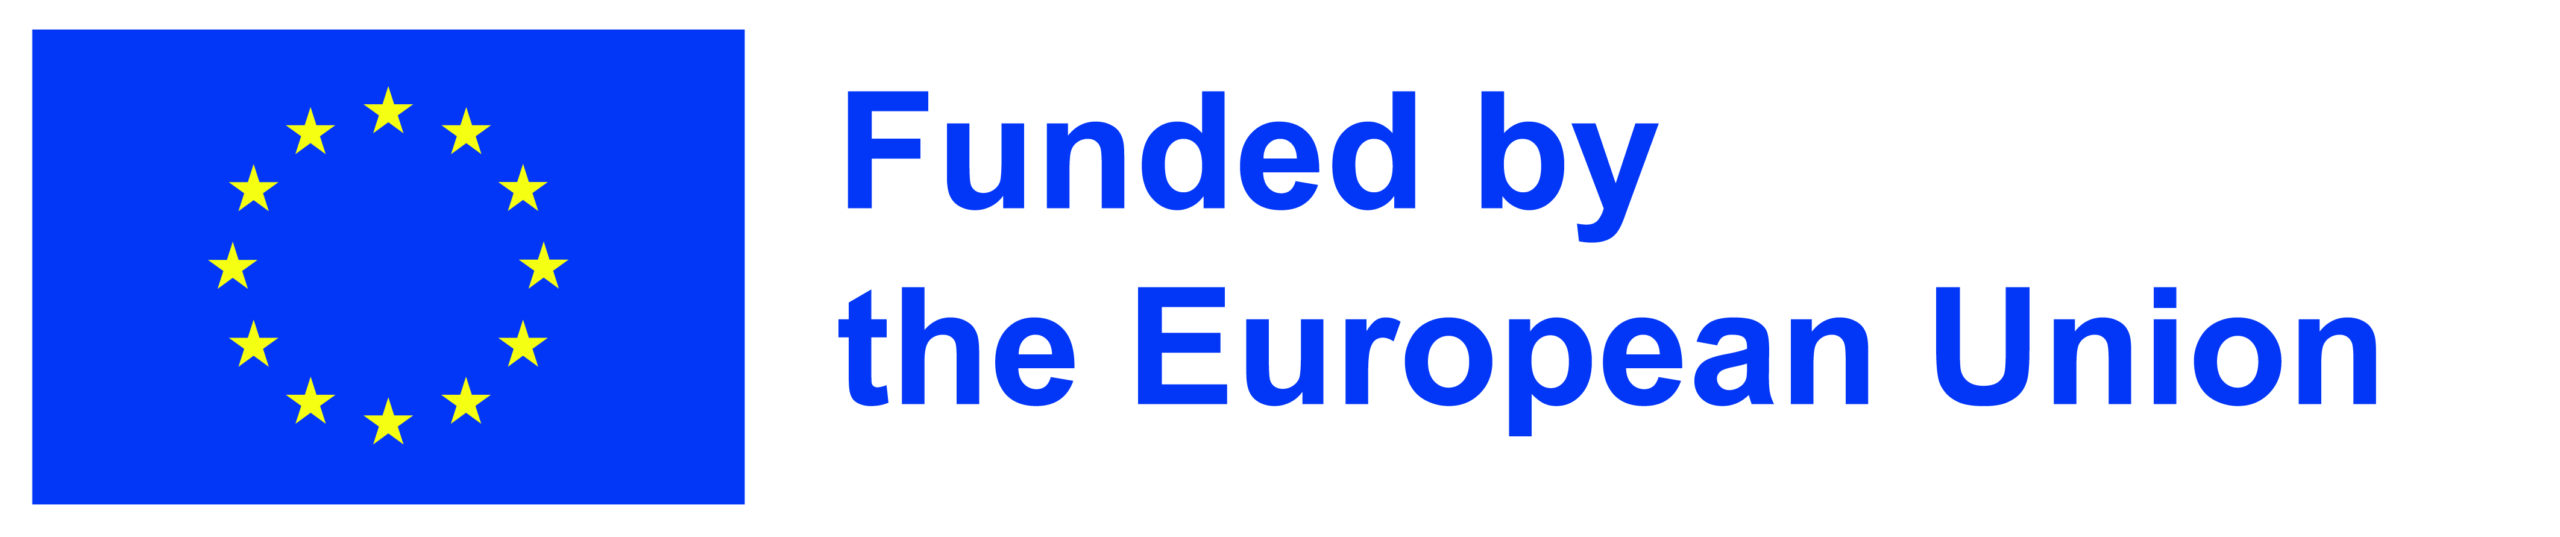 EN-Funded by the EU-POS